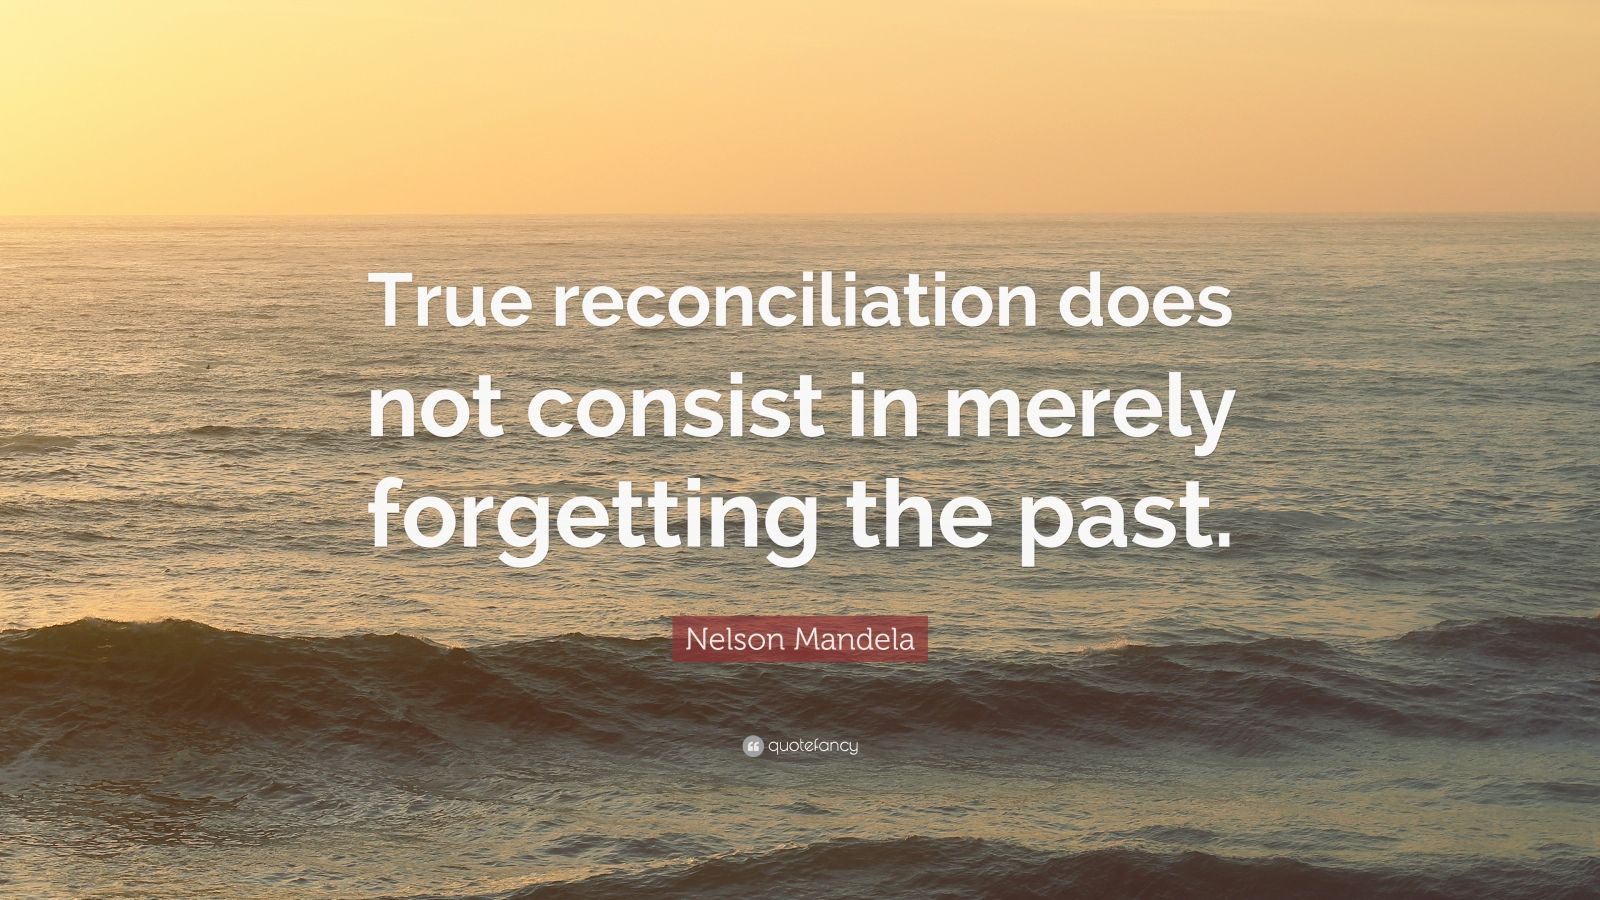 nelson-mandela-quote-true-reconciliation-does-not-consist-in-merely